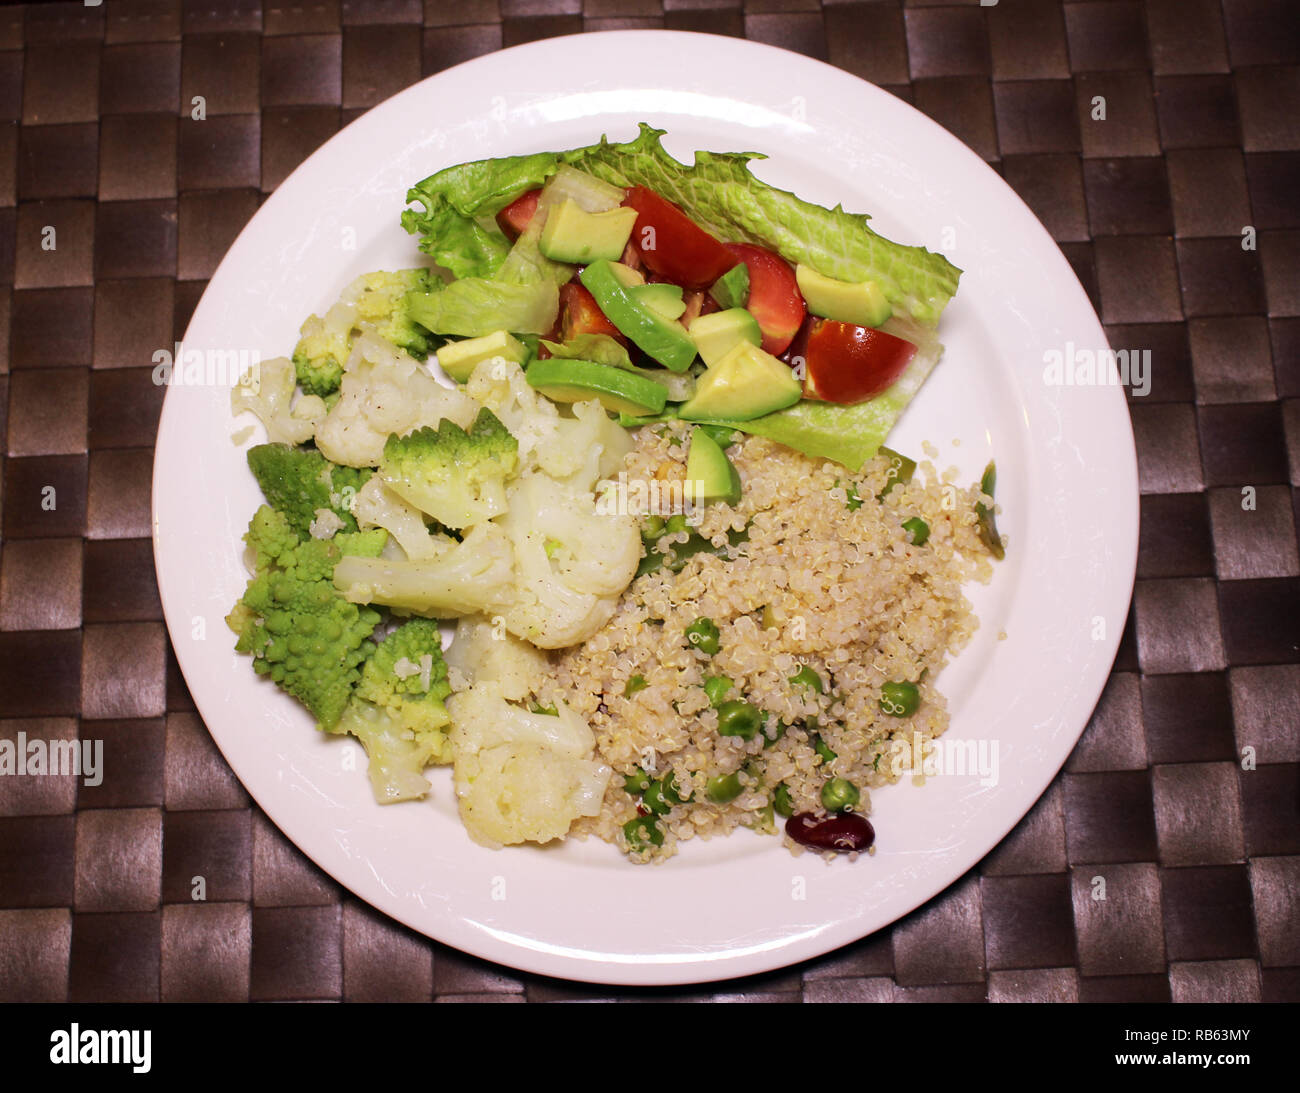 Healthy vegan food: a plate full of delicious, pure and green ingredients. Stock Photo